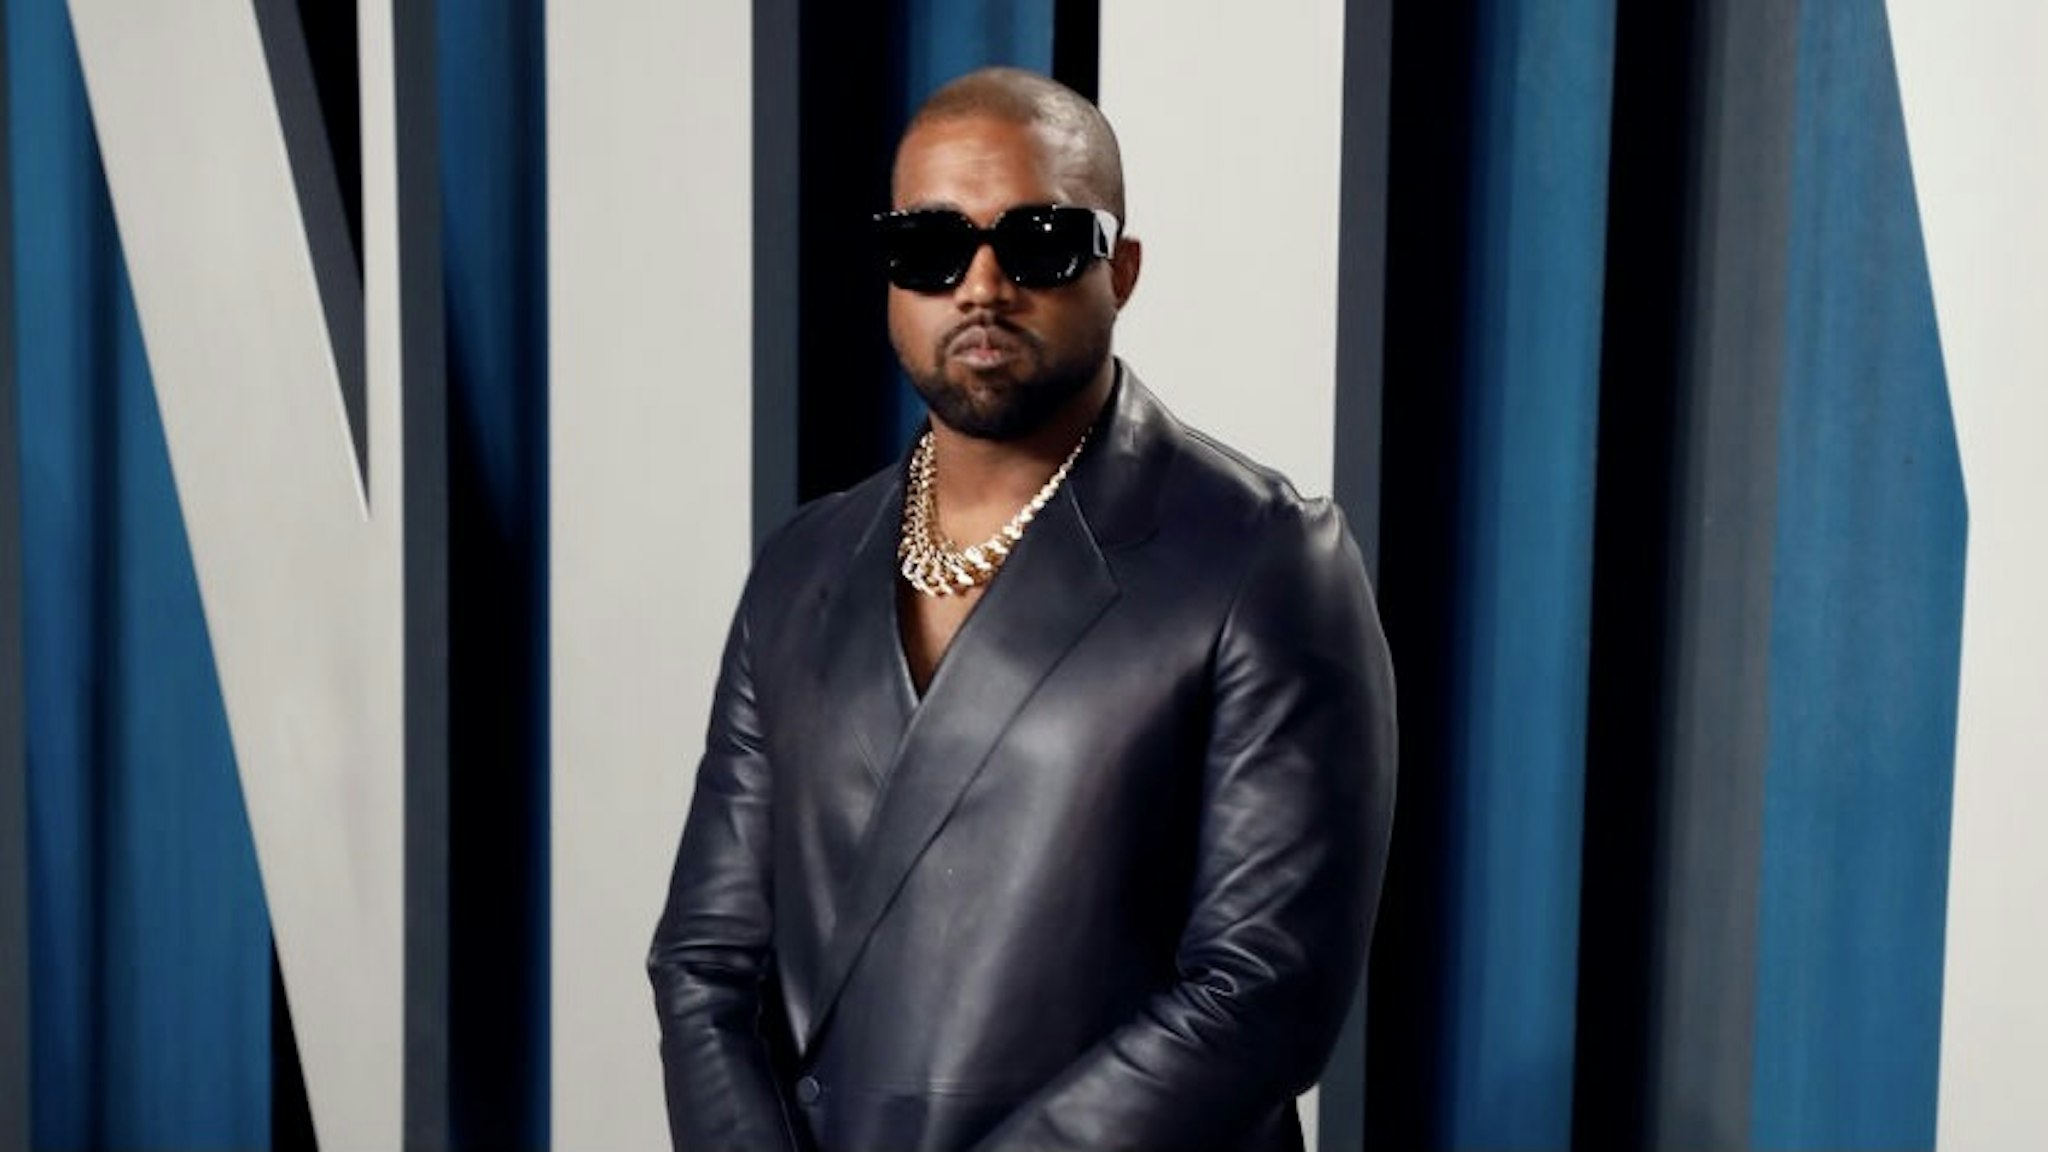 BEVERLY HILLS, CALIFORNIA - FEBRUARY 09: Kanye West attends the 2020 Vanity Fair Oscar Party at Wallis Annenberg Center for the Performing Arts on February 09, 2020 in Beverly Hills, California. (Photo by Taylor Hill/FilmMagic,)